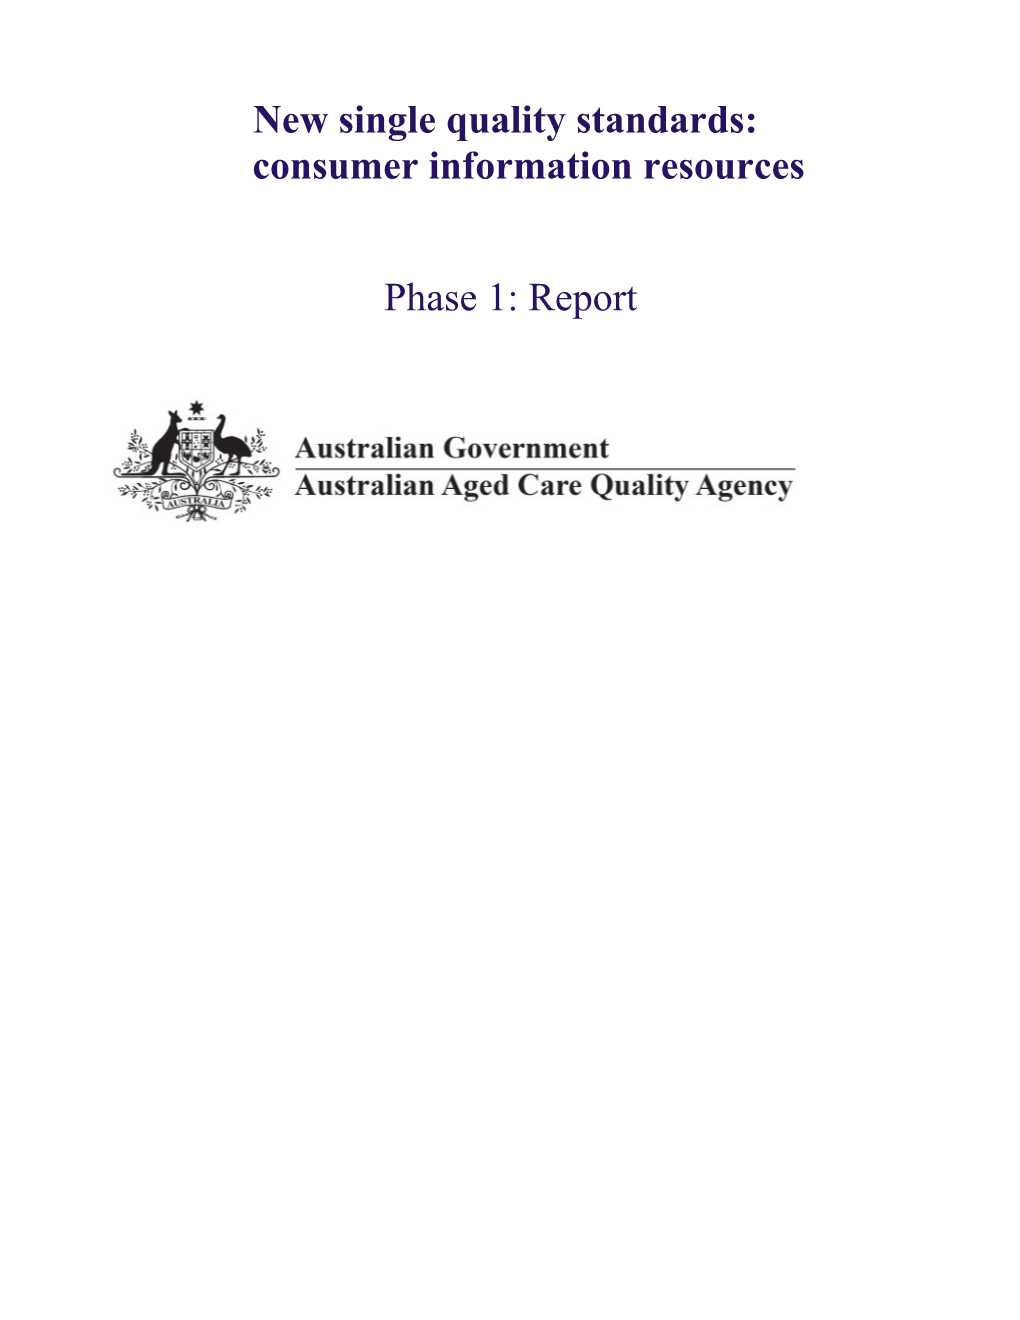 New Single Quality Standards: Consumer Information Resources